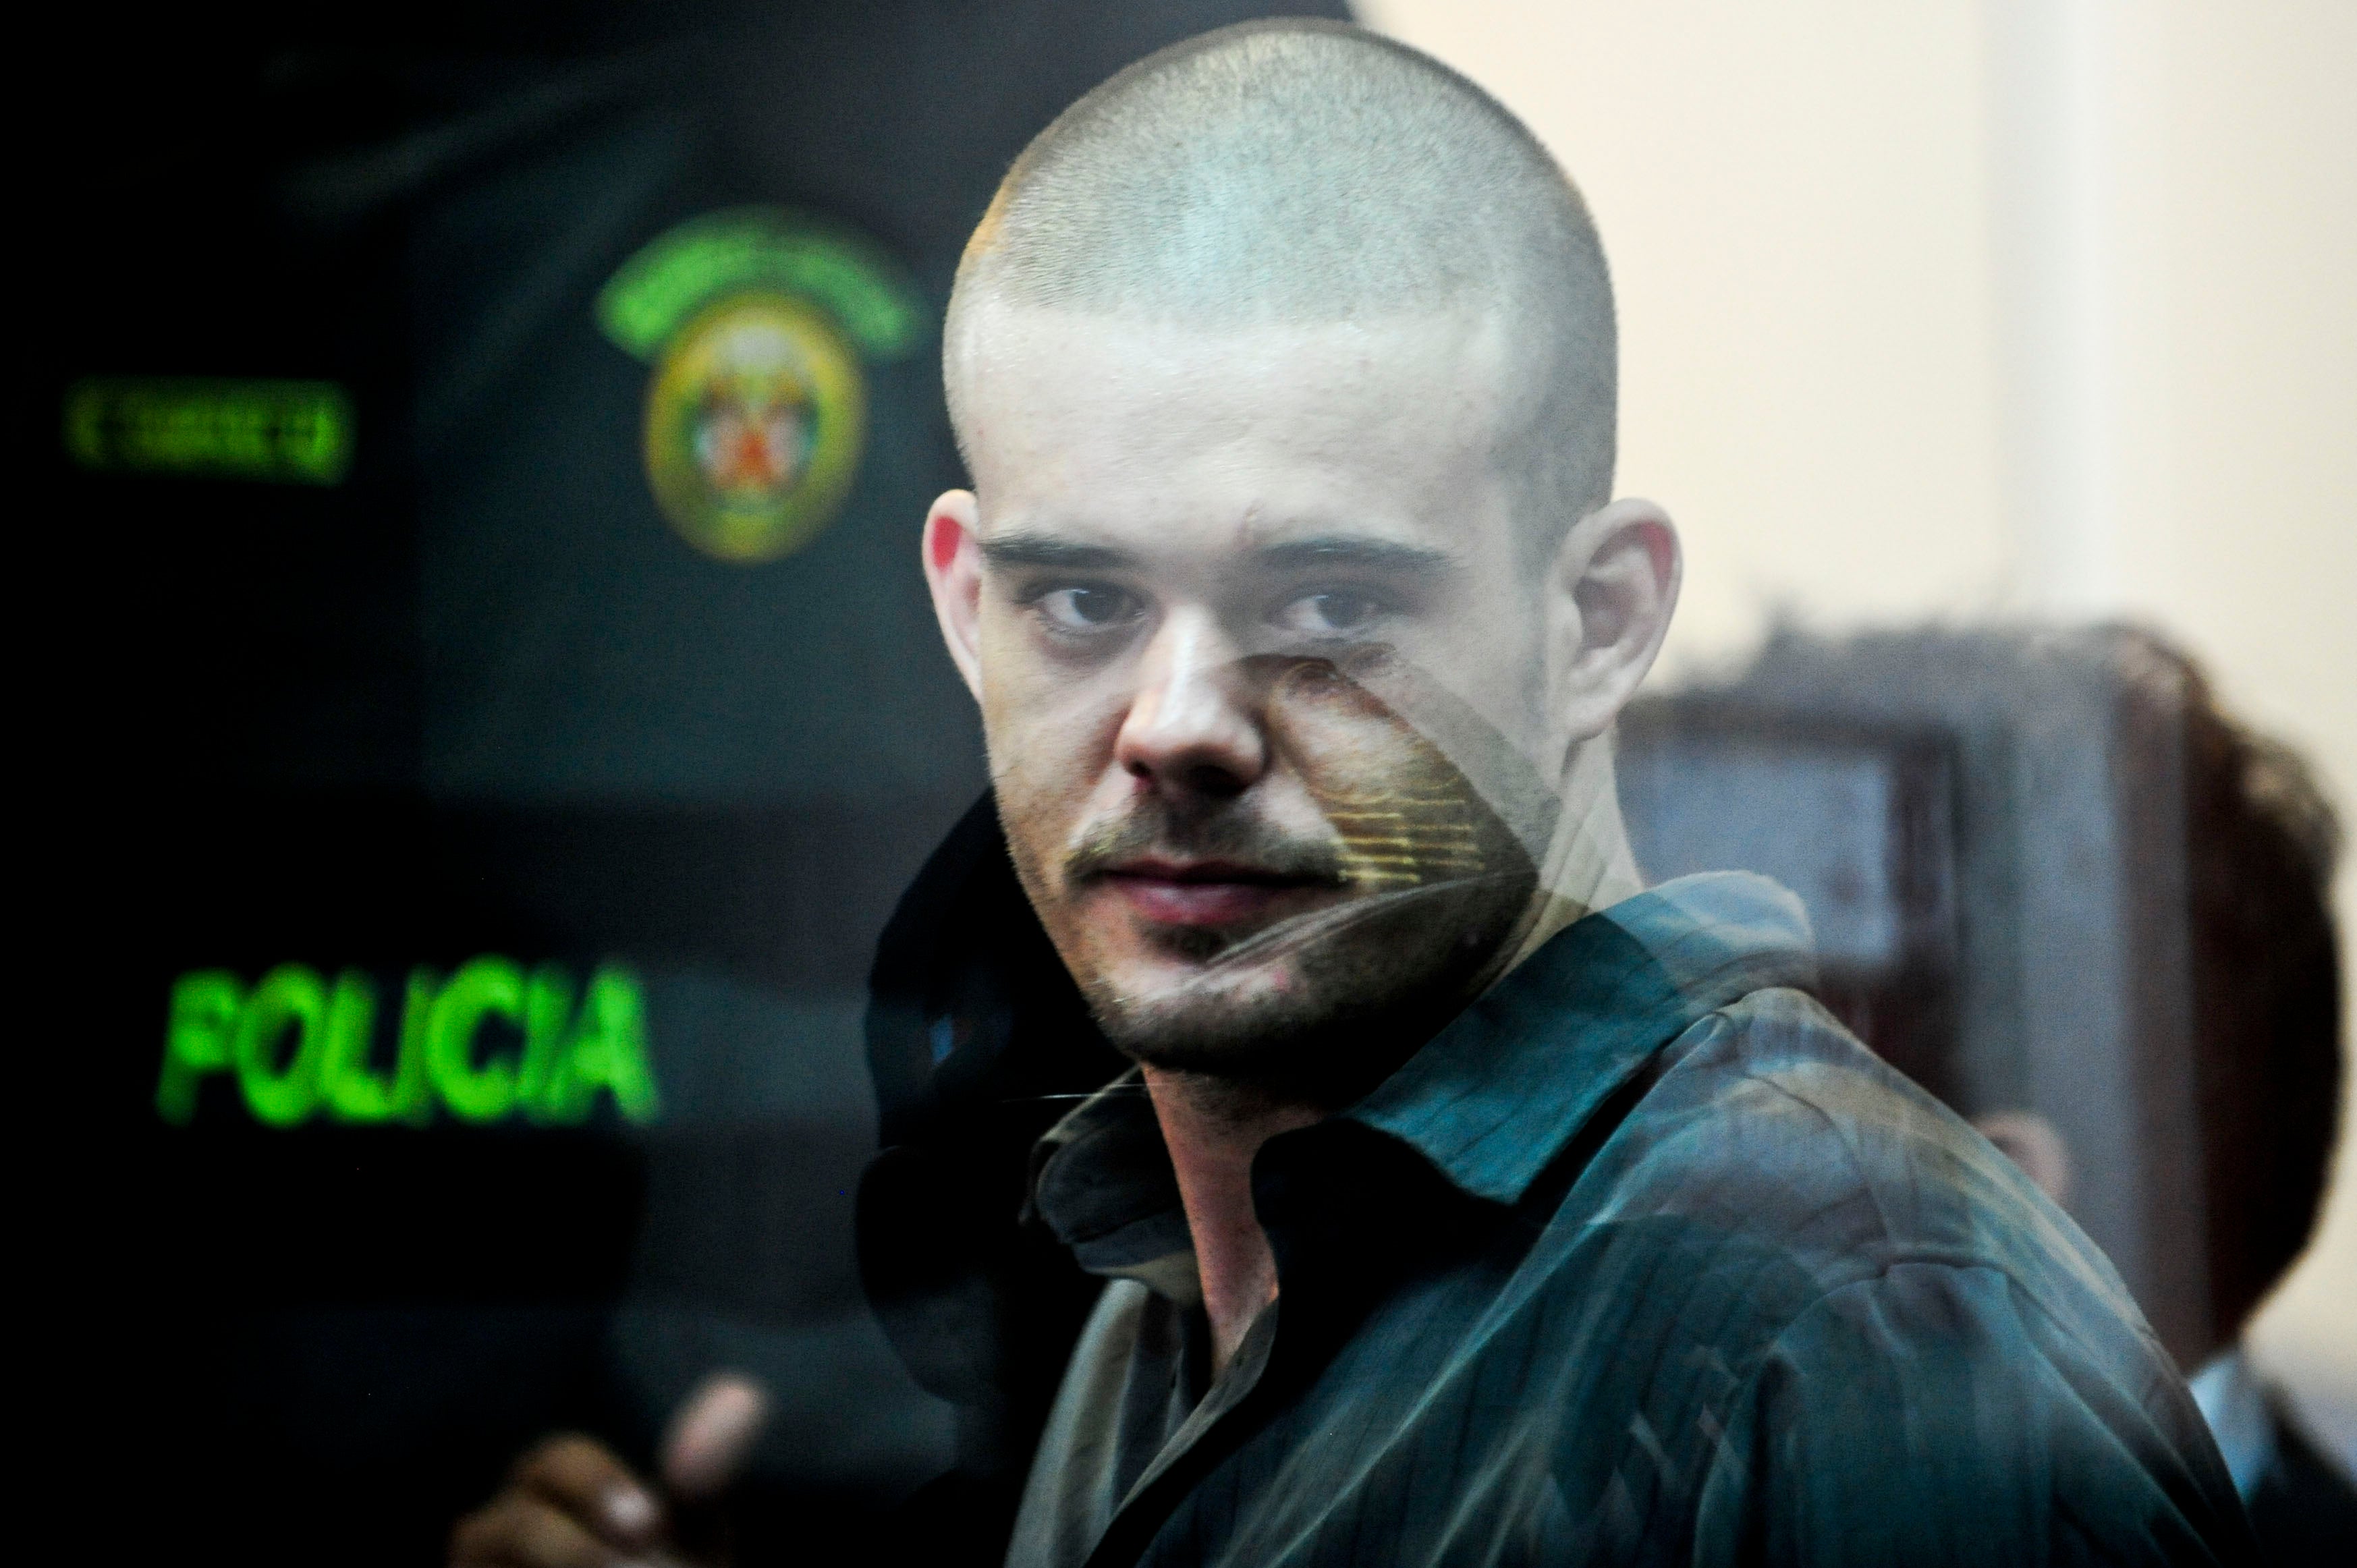 Dutch national Joran Van der Sloot, seen here in a file photo dated 6 January 2012, during his preliminary hearing in court in the Lurigancho prison in Lima